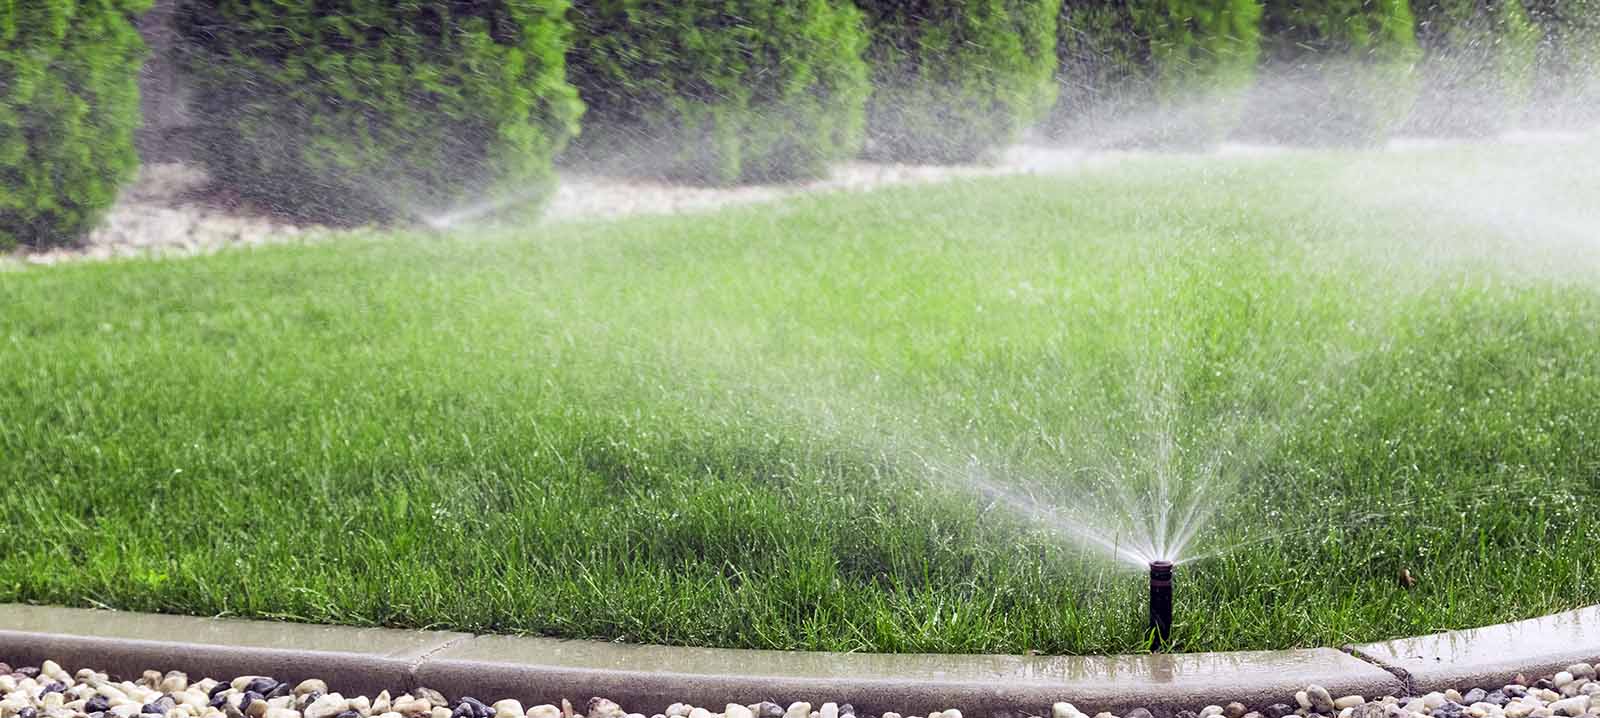 picture of sprinkler watering green grass